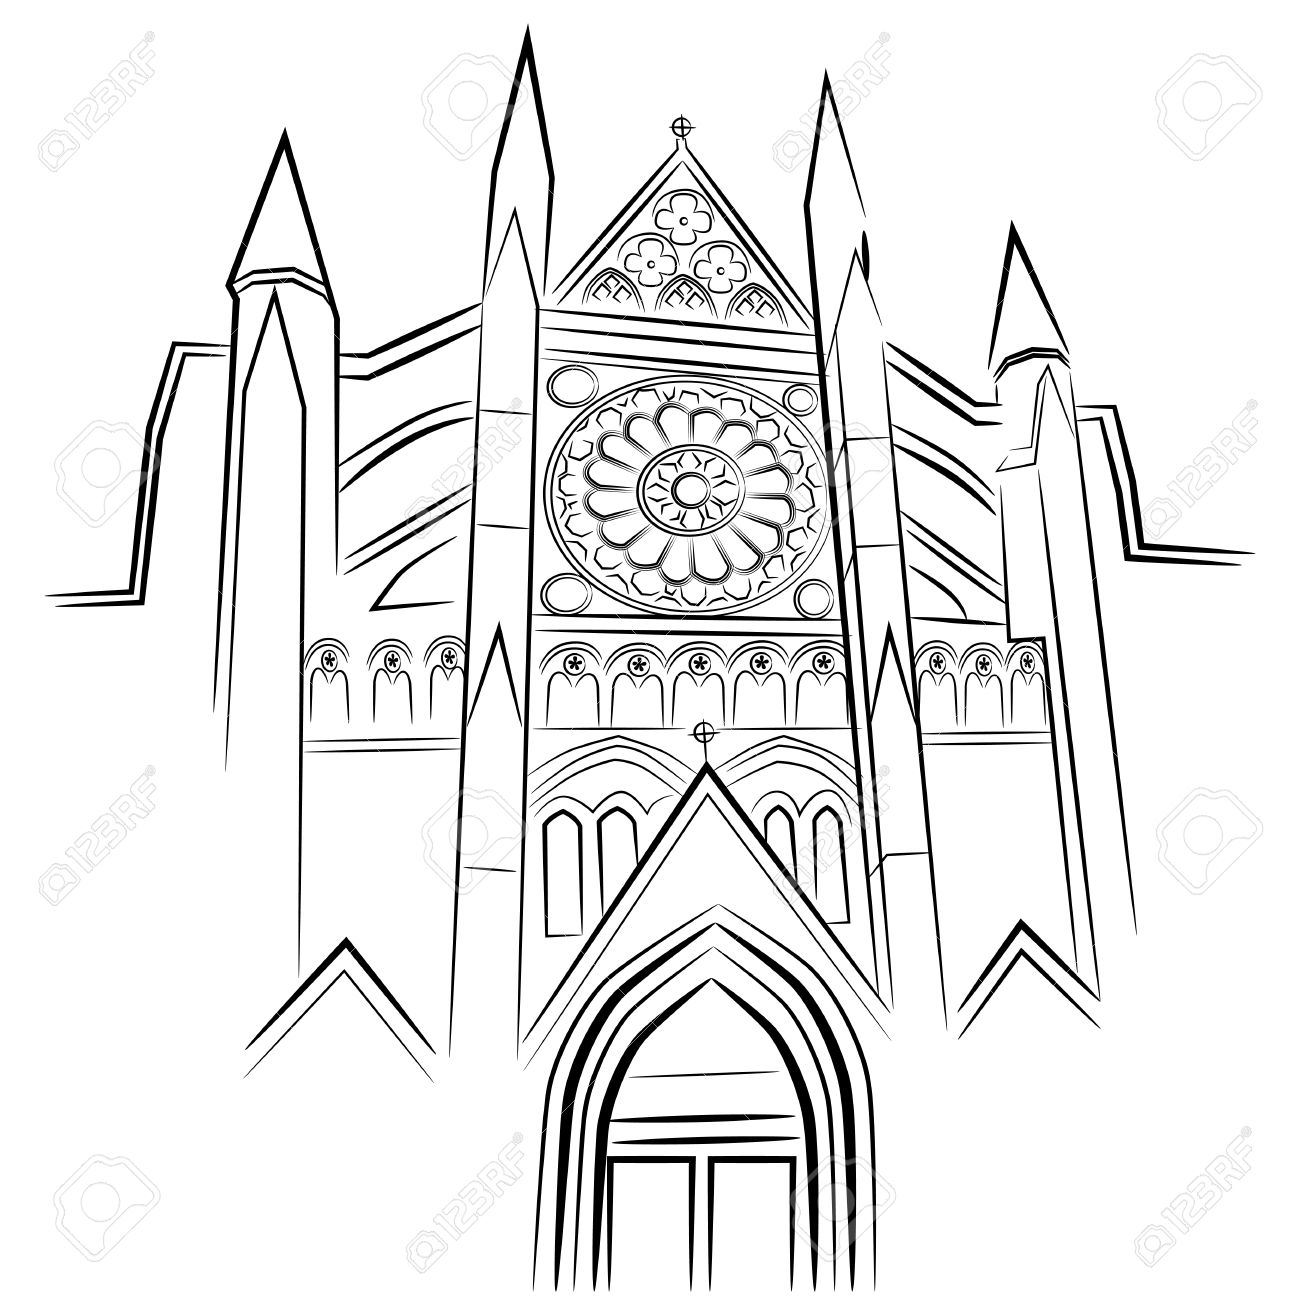 Westminster abbey clipart.